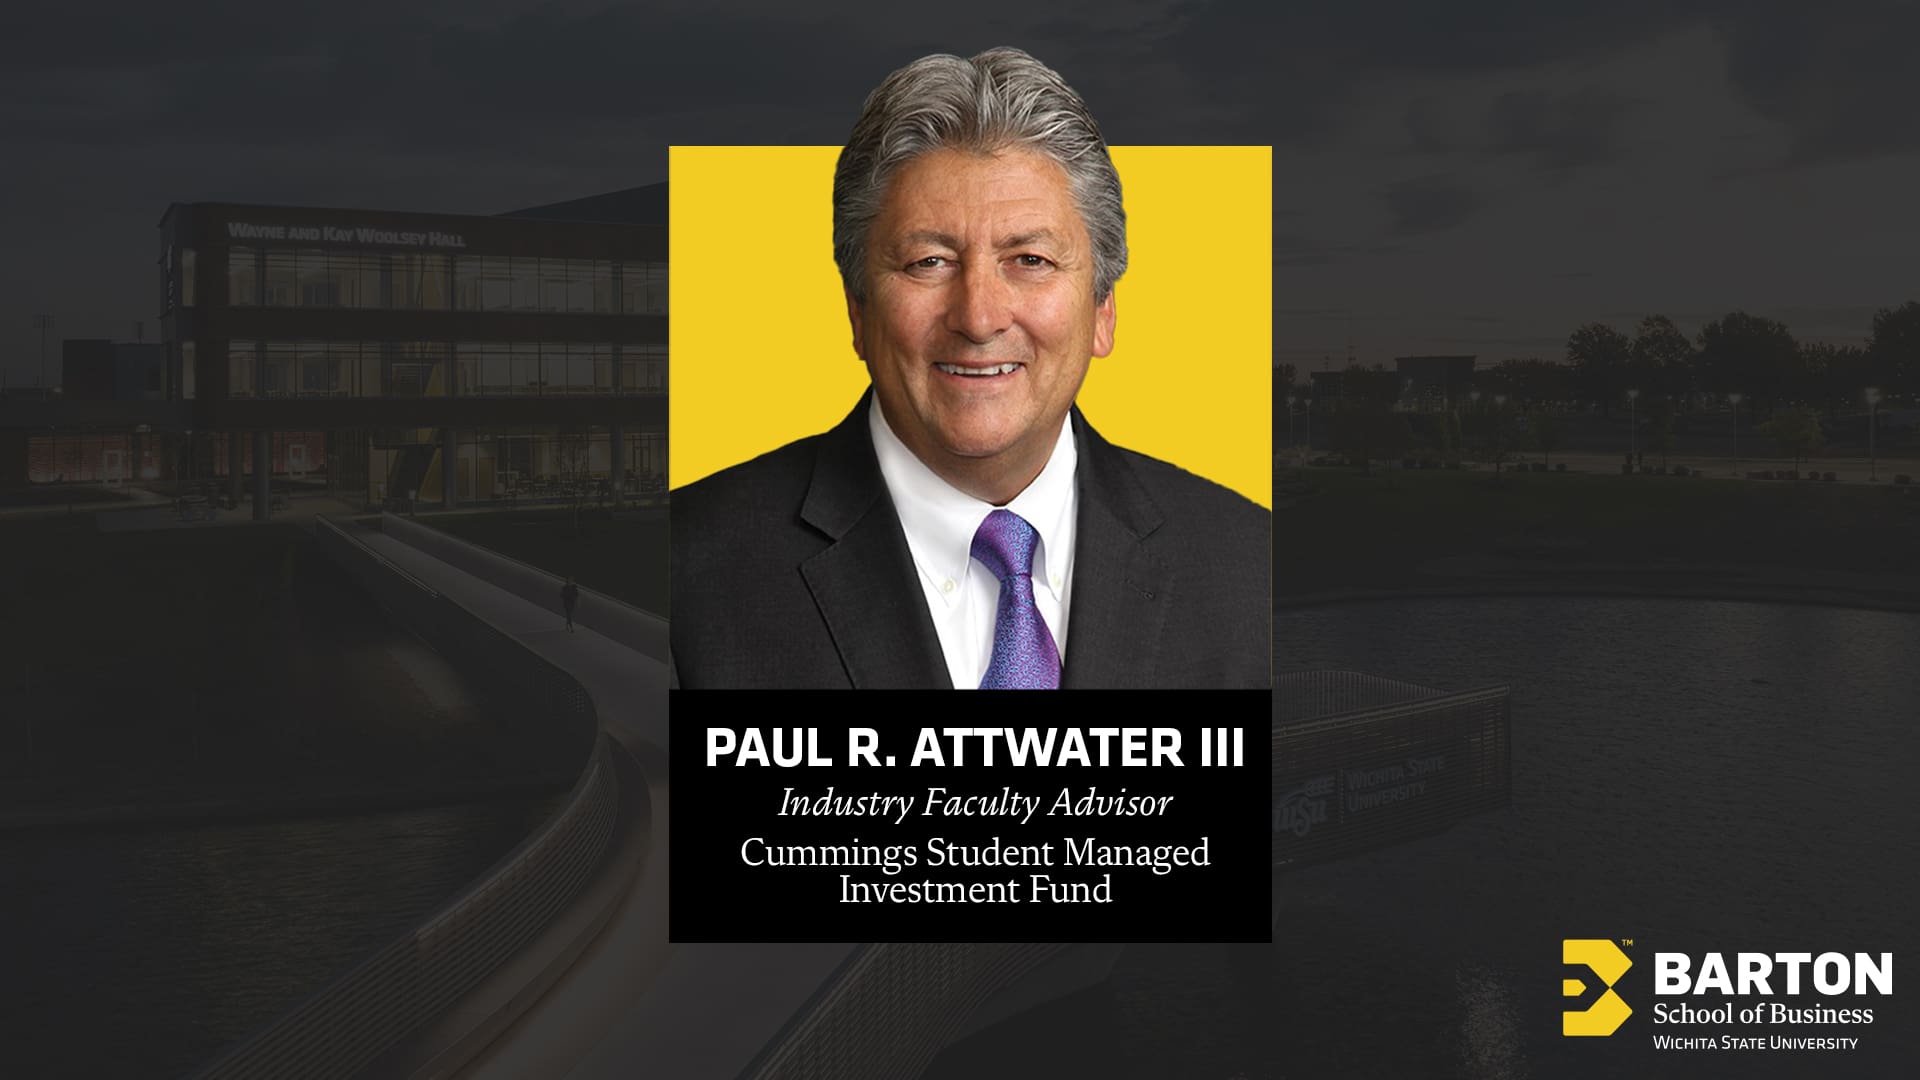 Paul R. Attwater III, the Erin and Kyle Cummings Student Managed Investment Fund (SMIF) industry faculty advisor